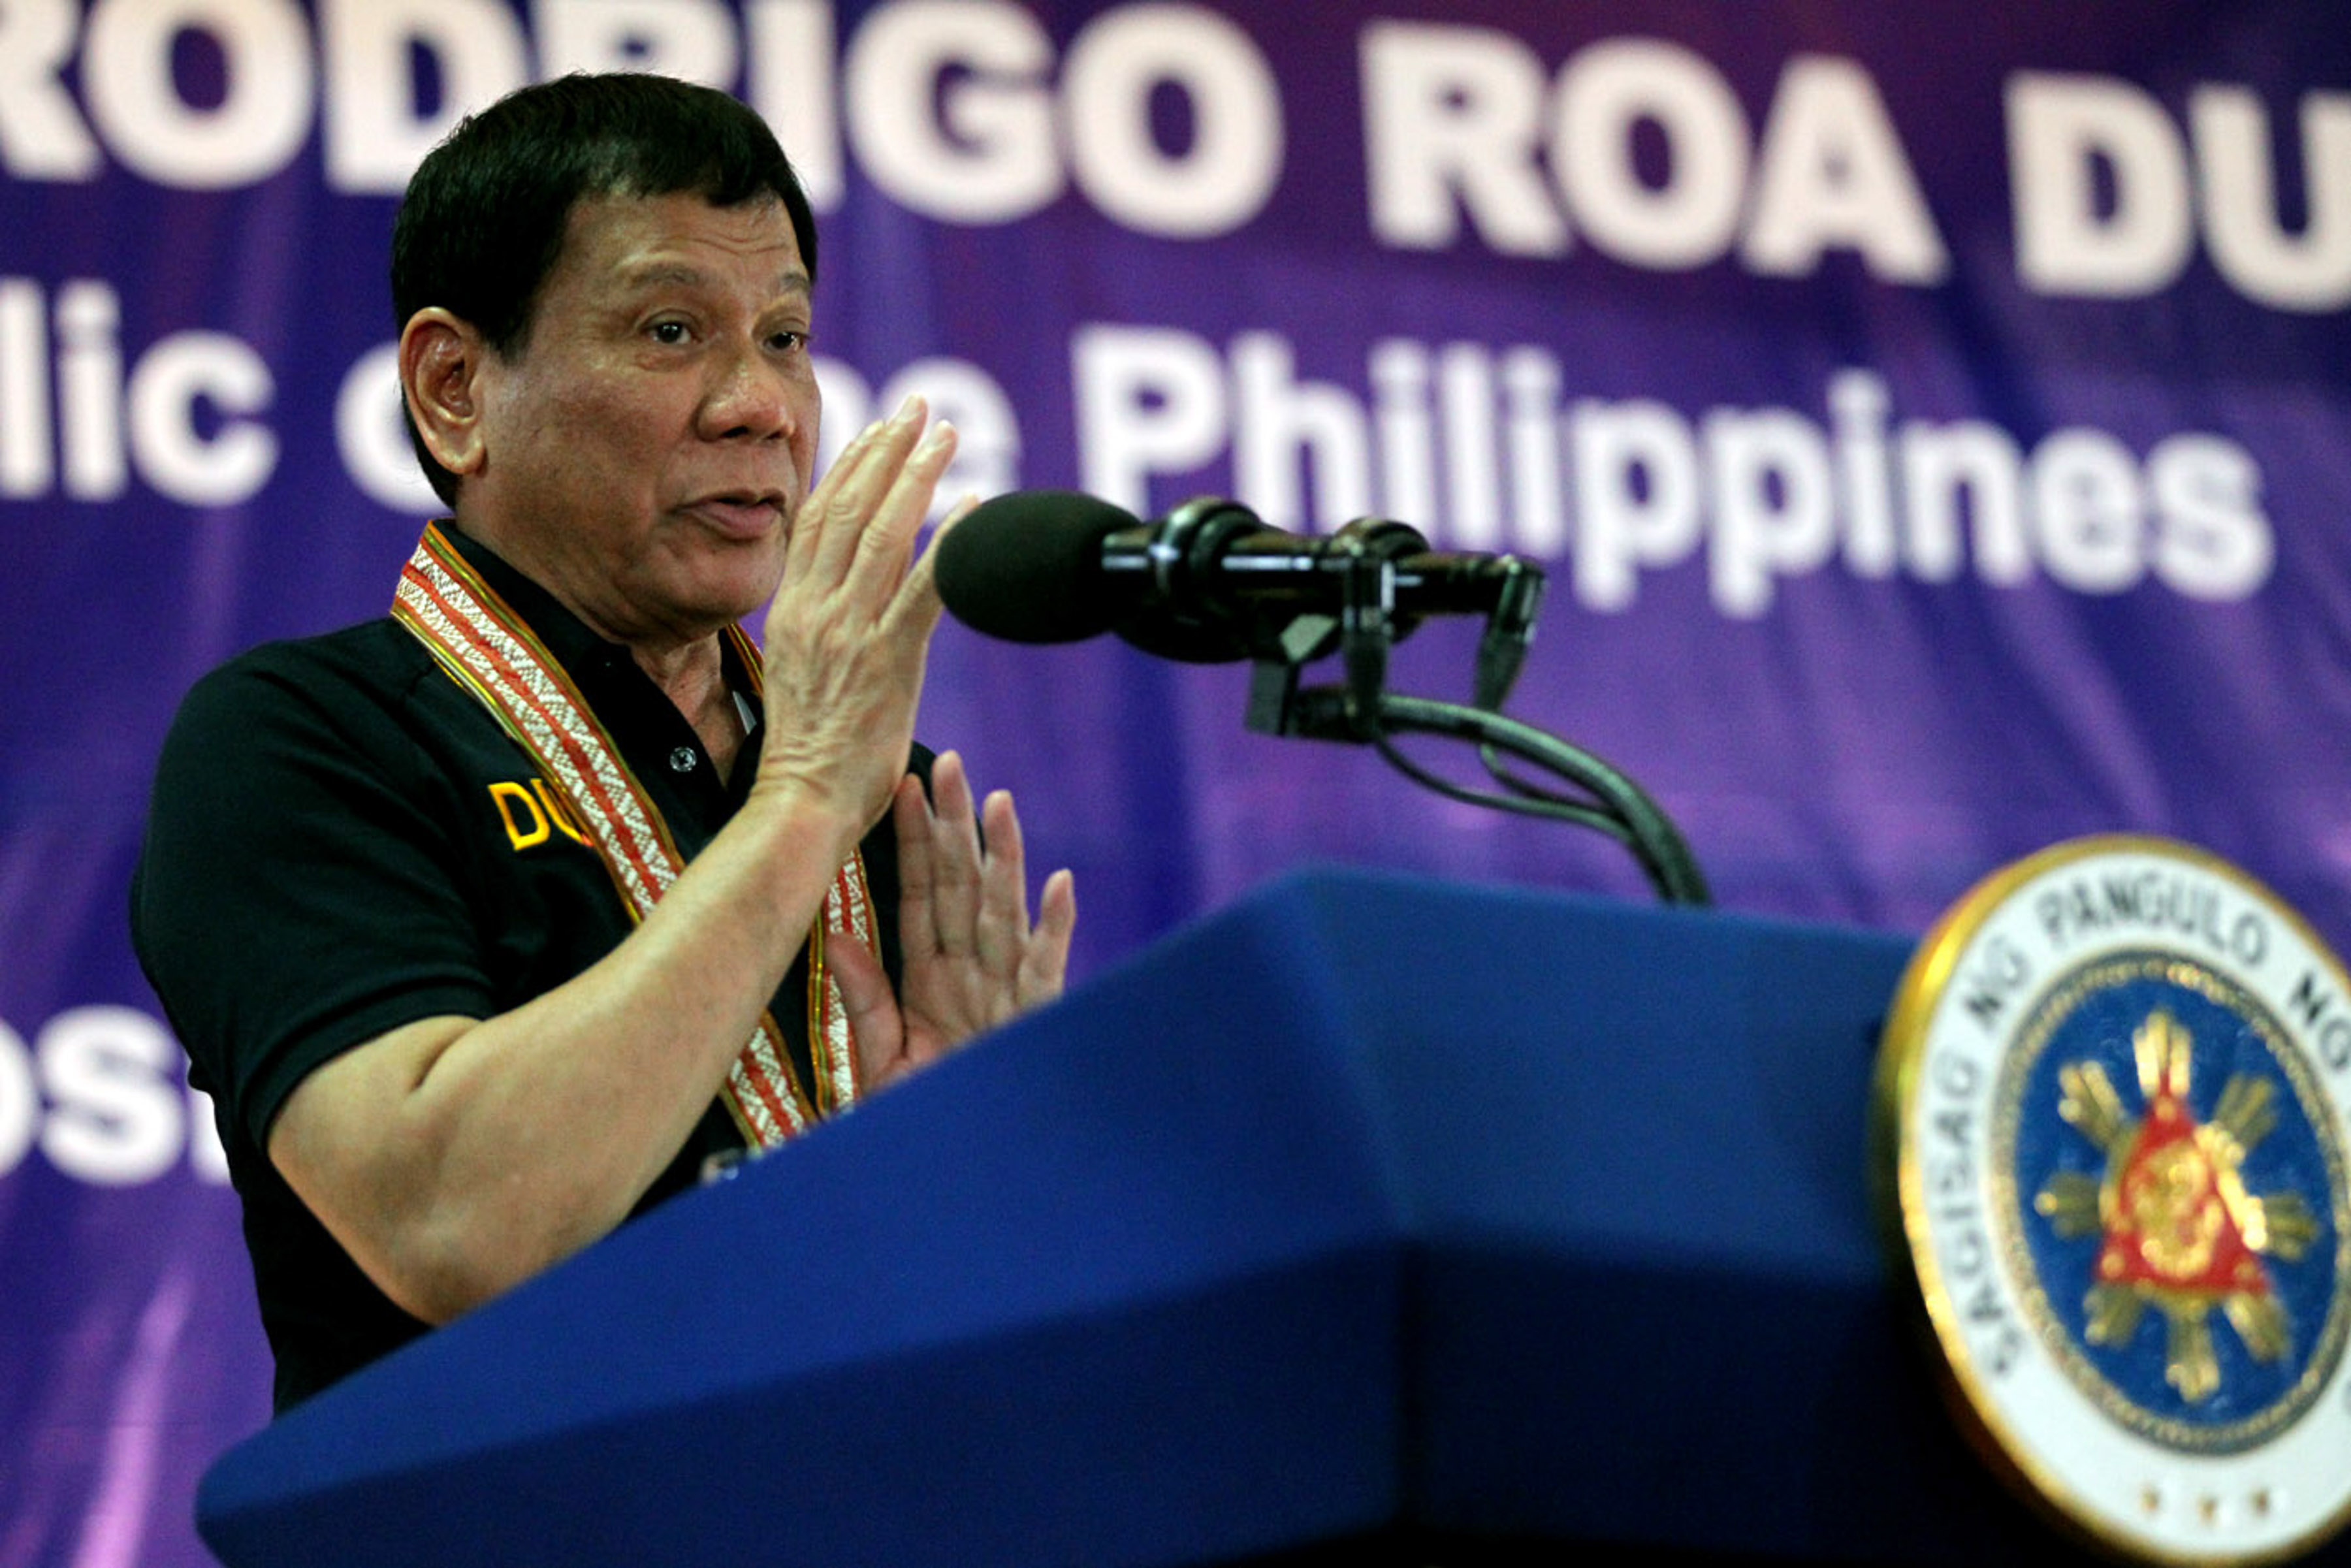 CONTROVERSIAL LEADER. President Rodrigo Duterte's controversial statements, some lambasting world leaders and organizations, have put him in the international spotlight. File photo by PPD 